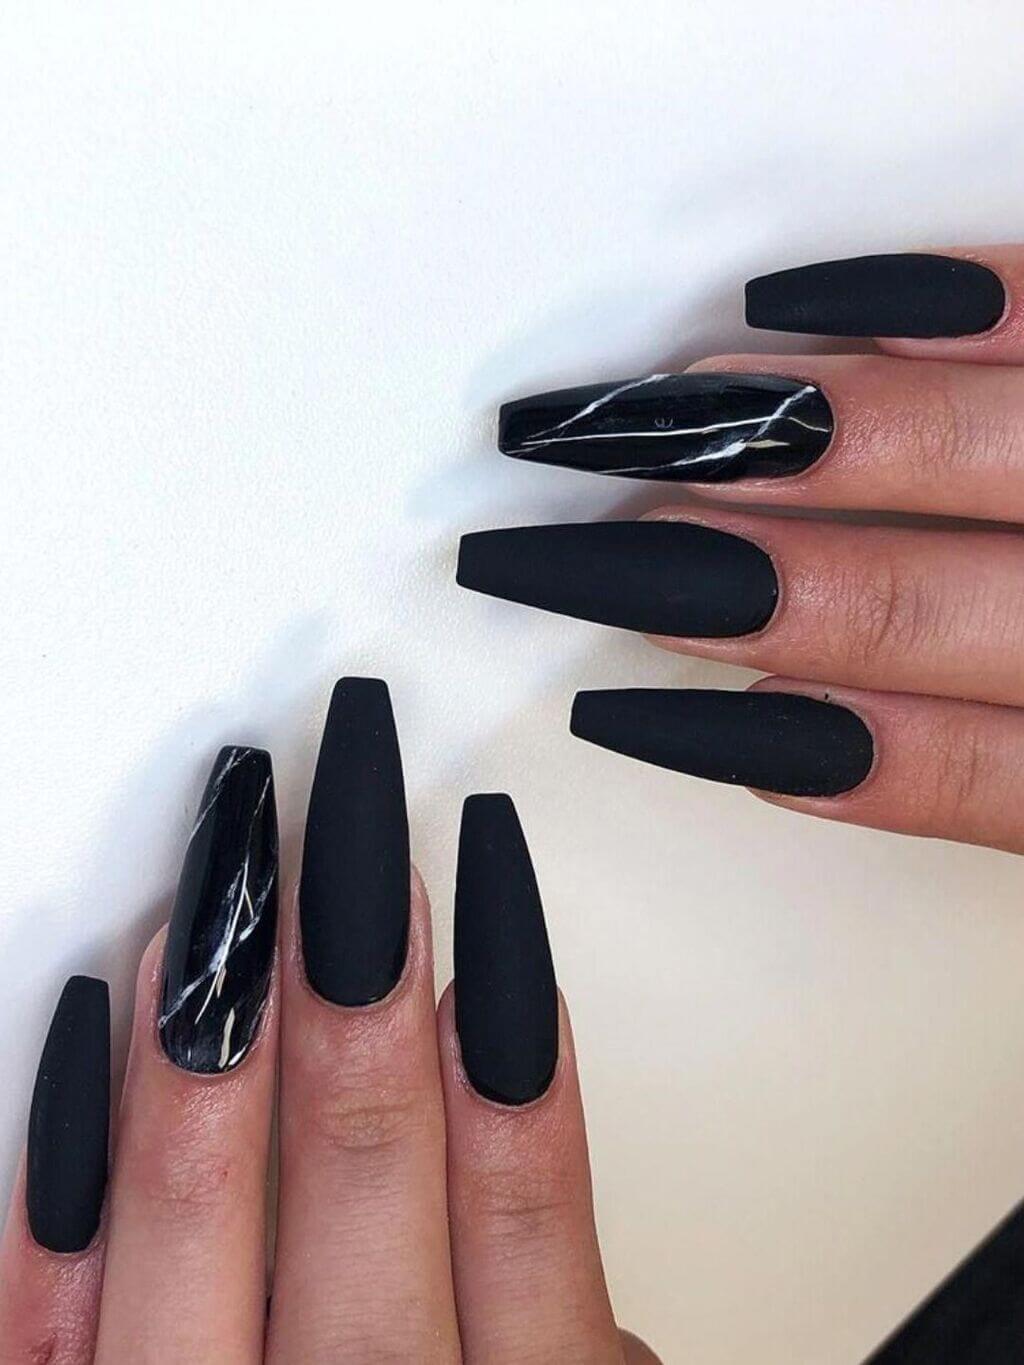 A woman's hand with long black nails
